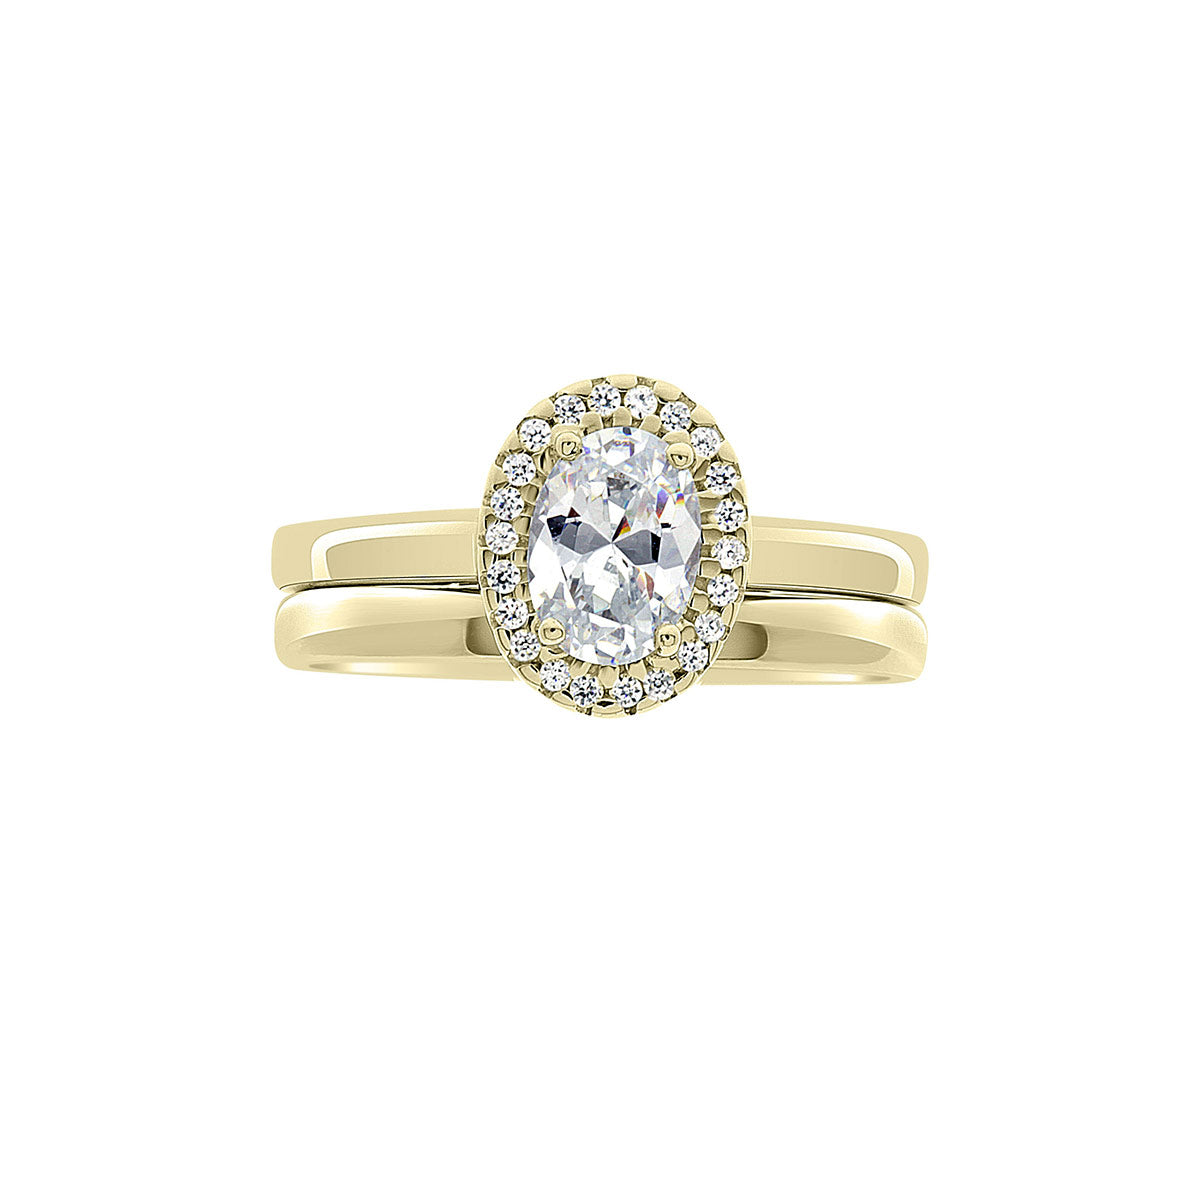 Oval Vintage Engagement Ring in yellow gold pictured with a matching wedding band